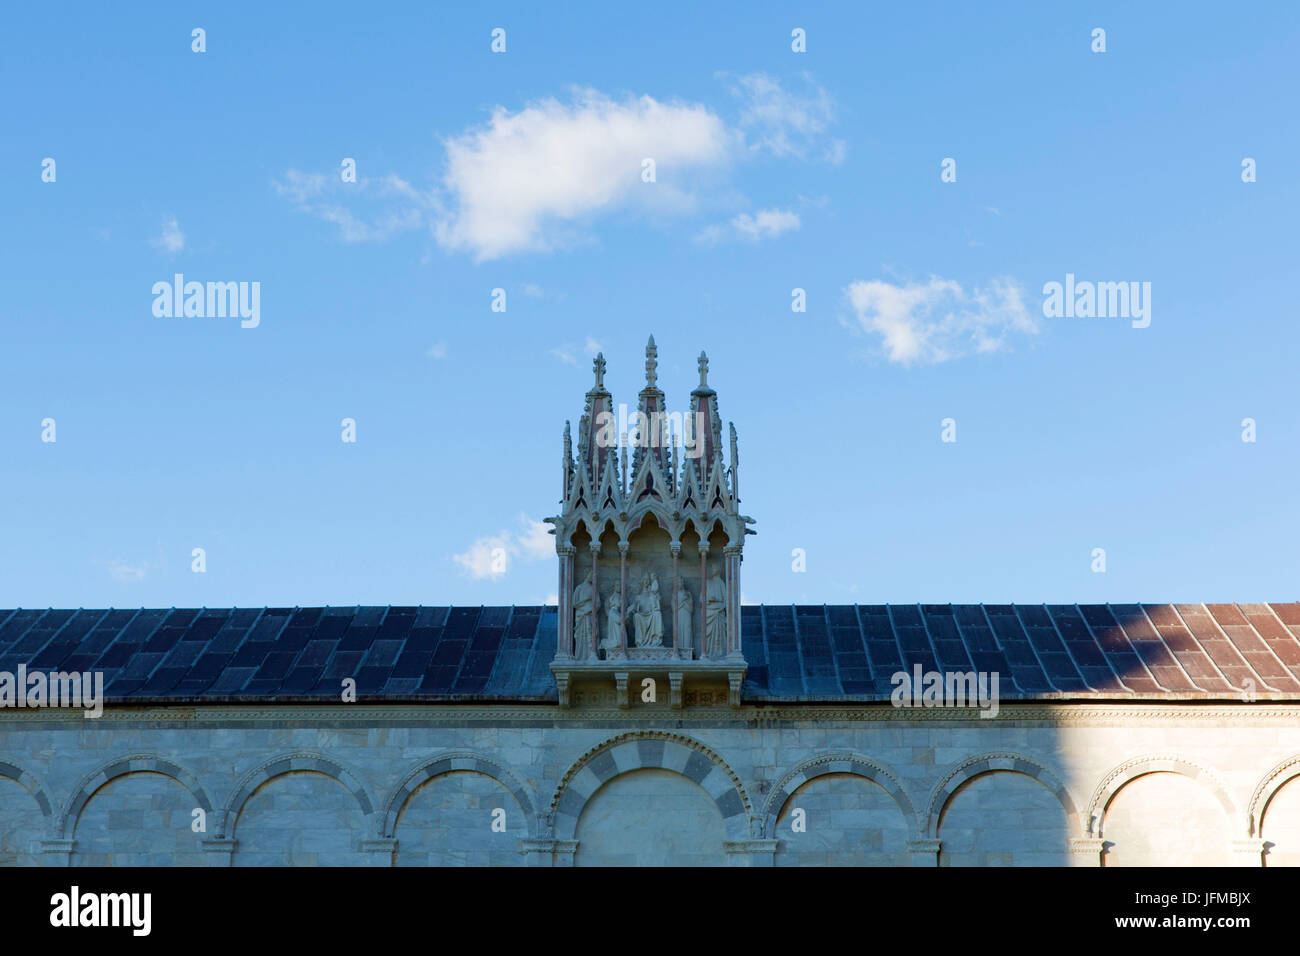 Europe, Italy, Tuscany, Pisa, Architectural details Stock Photo